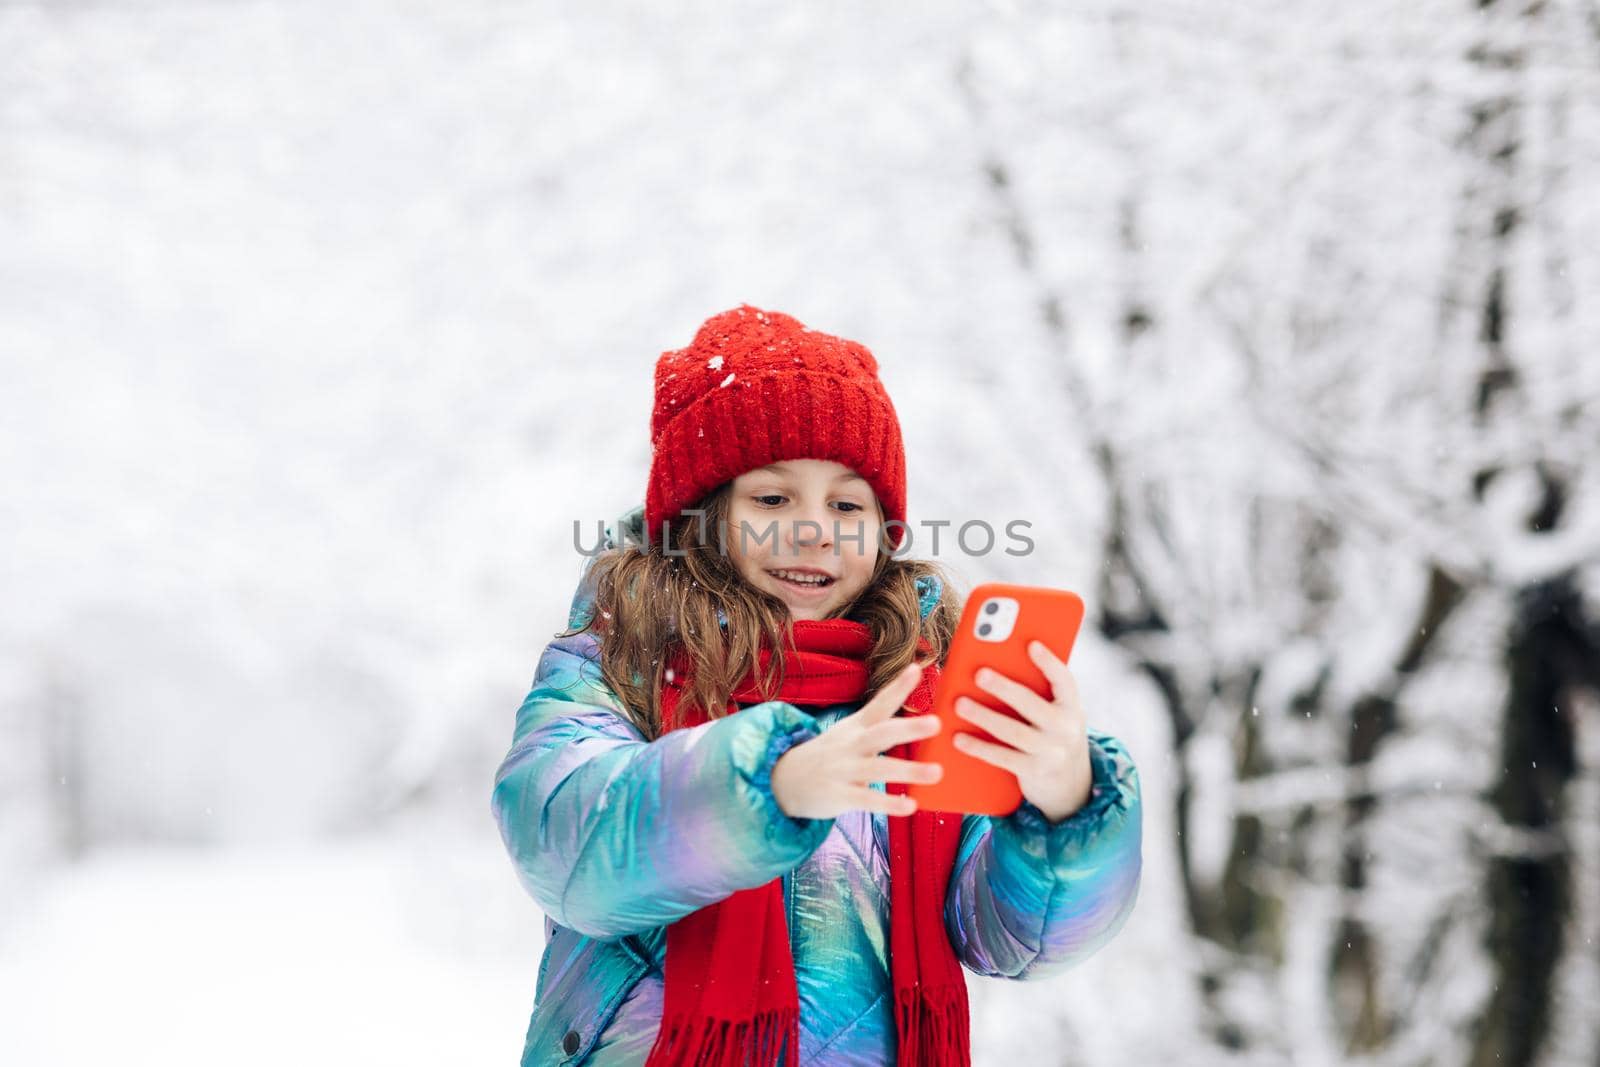 Cute little girl taking a selfie in the winter forest. Winter travel with children concept. Adorable happy smiling kid girl enjoy making selfie camera shot by smartphone by uflypro